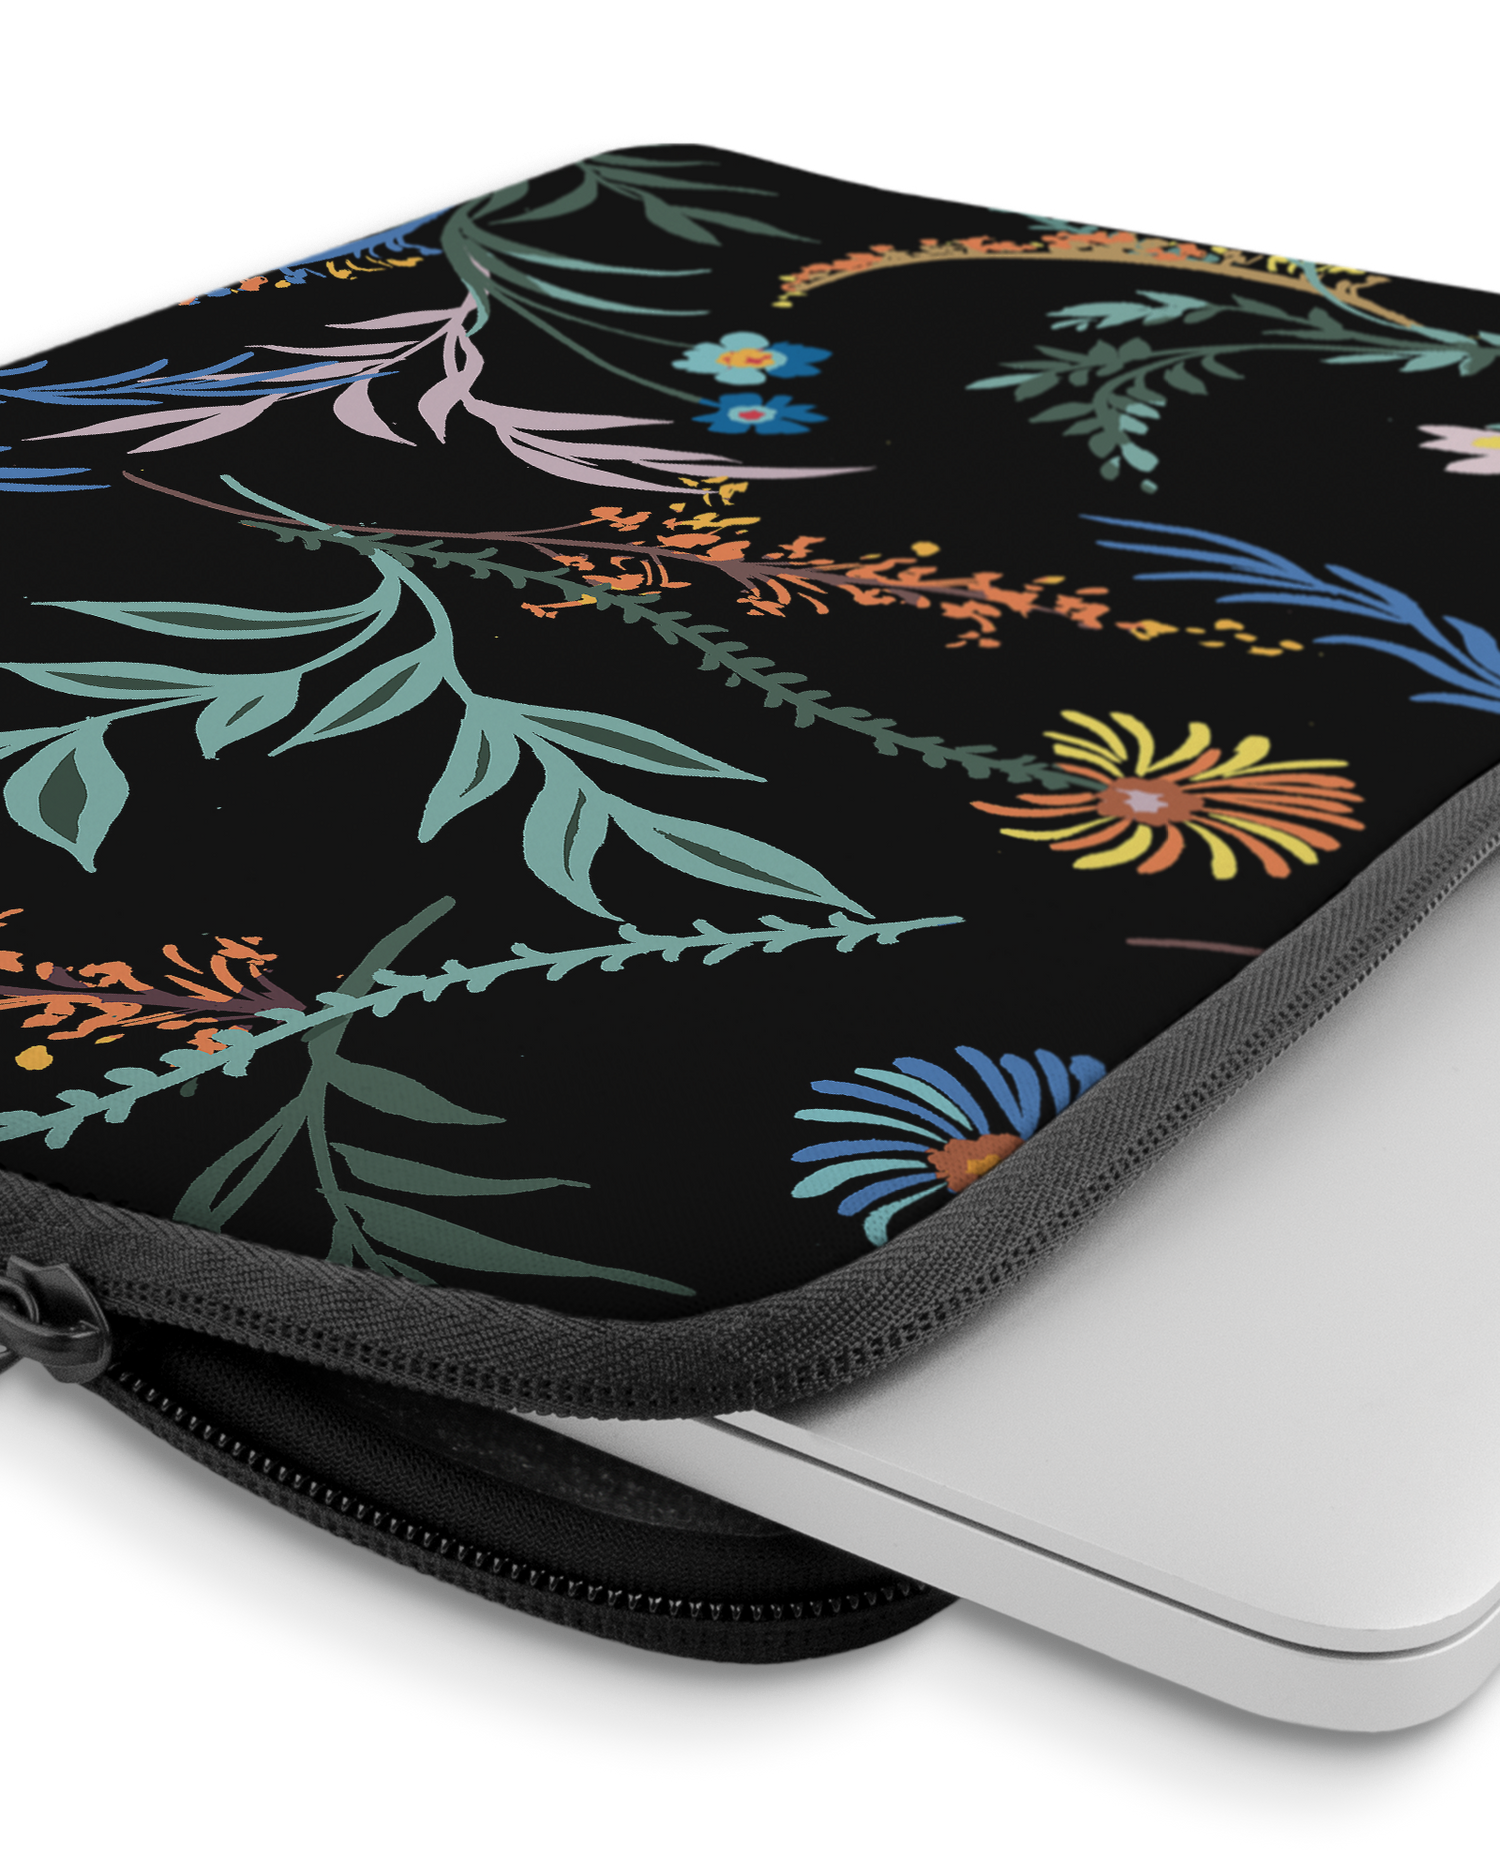 Woodland Spring Floral Laptop Case 13-14 inch with device inside